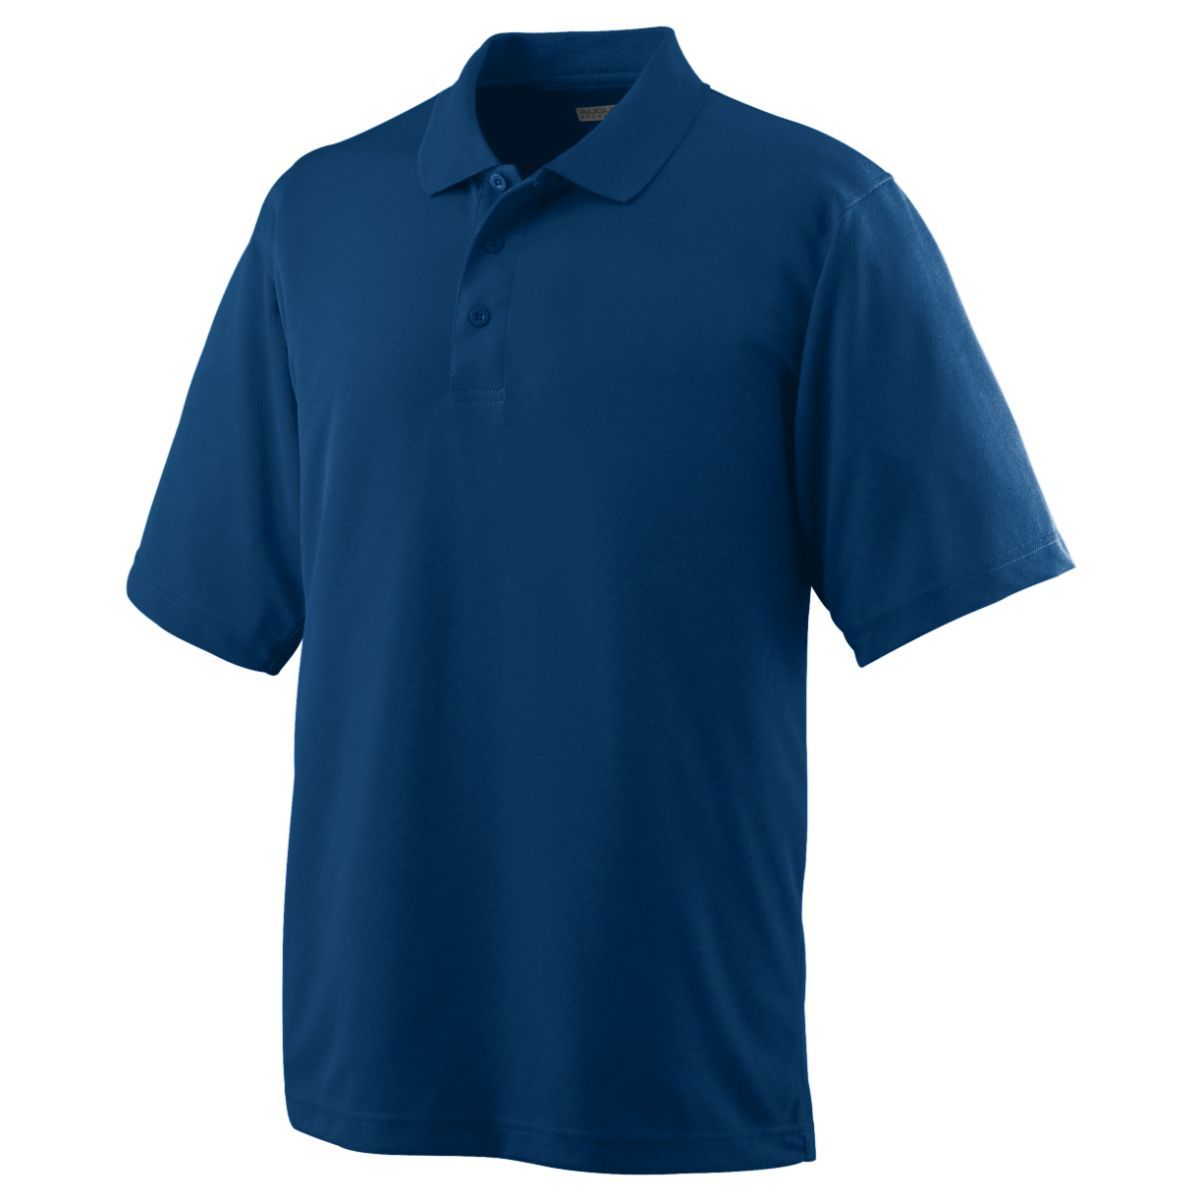 Augusta Sportswear Wicking Mesh Polo in Navy  -Part of the Adult, Adult-Polos, Polos, Augusta-Products, Tennis, Shirts product lines at KanaleyCreations.com